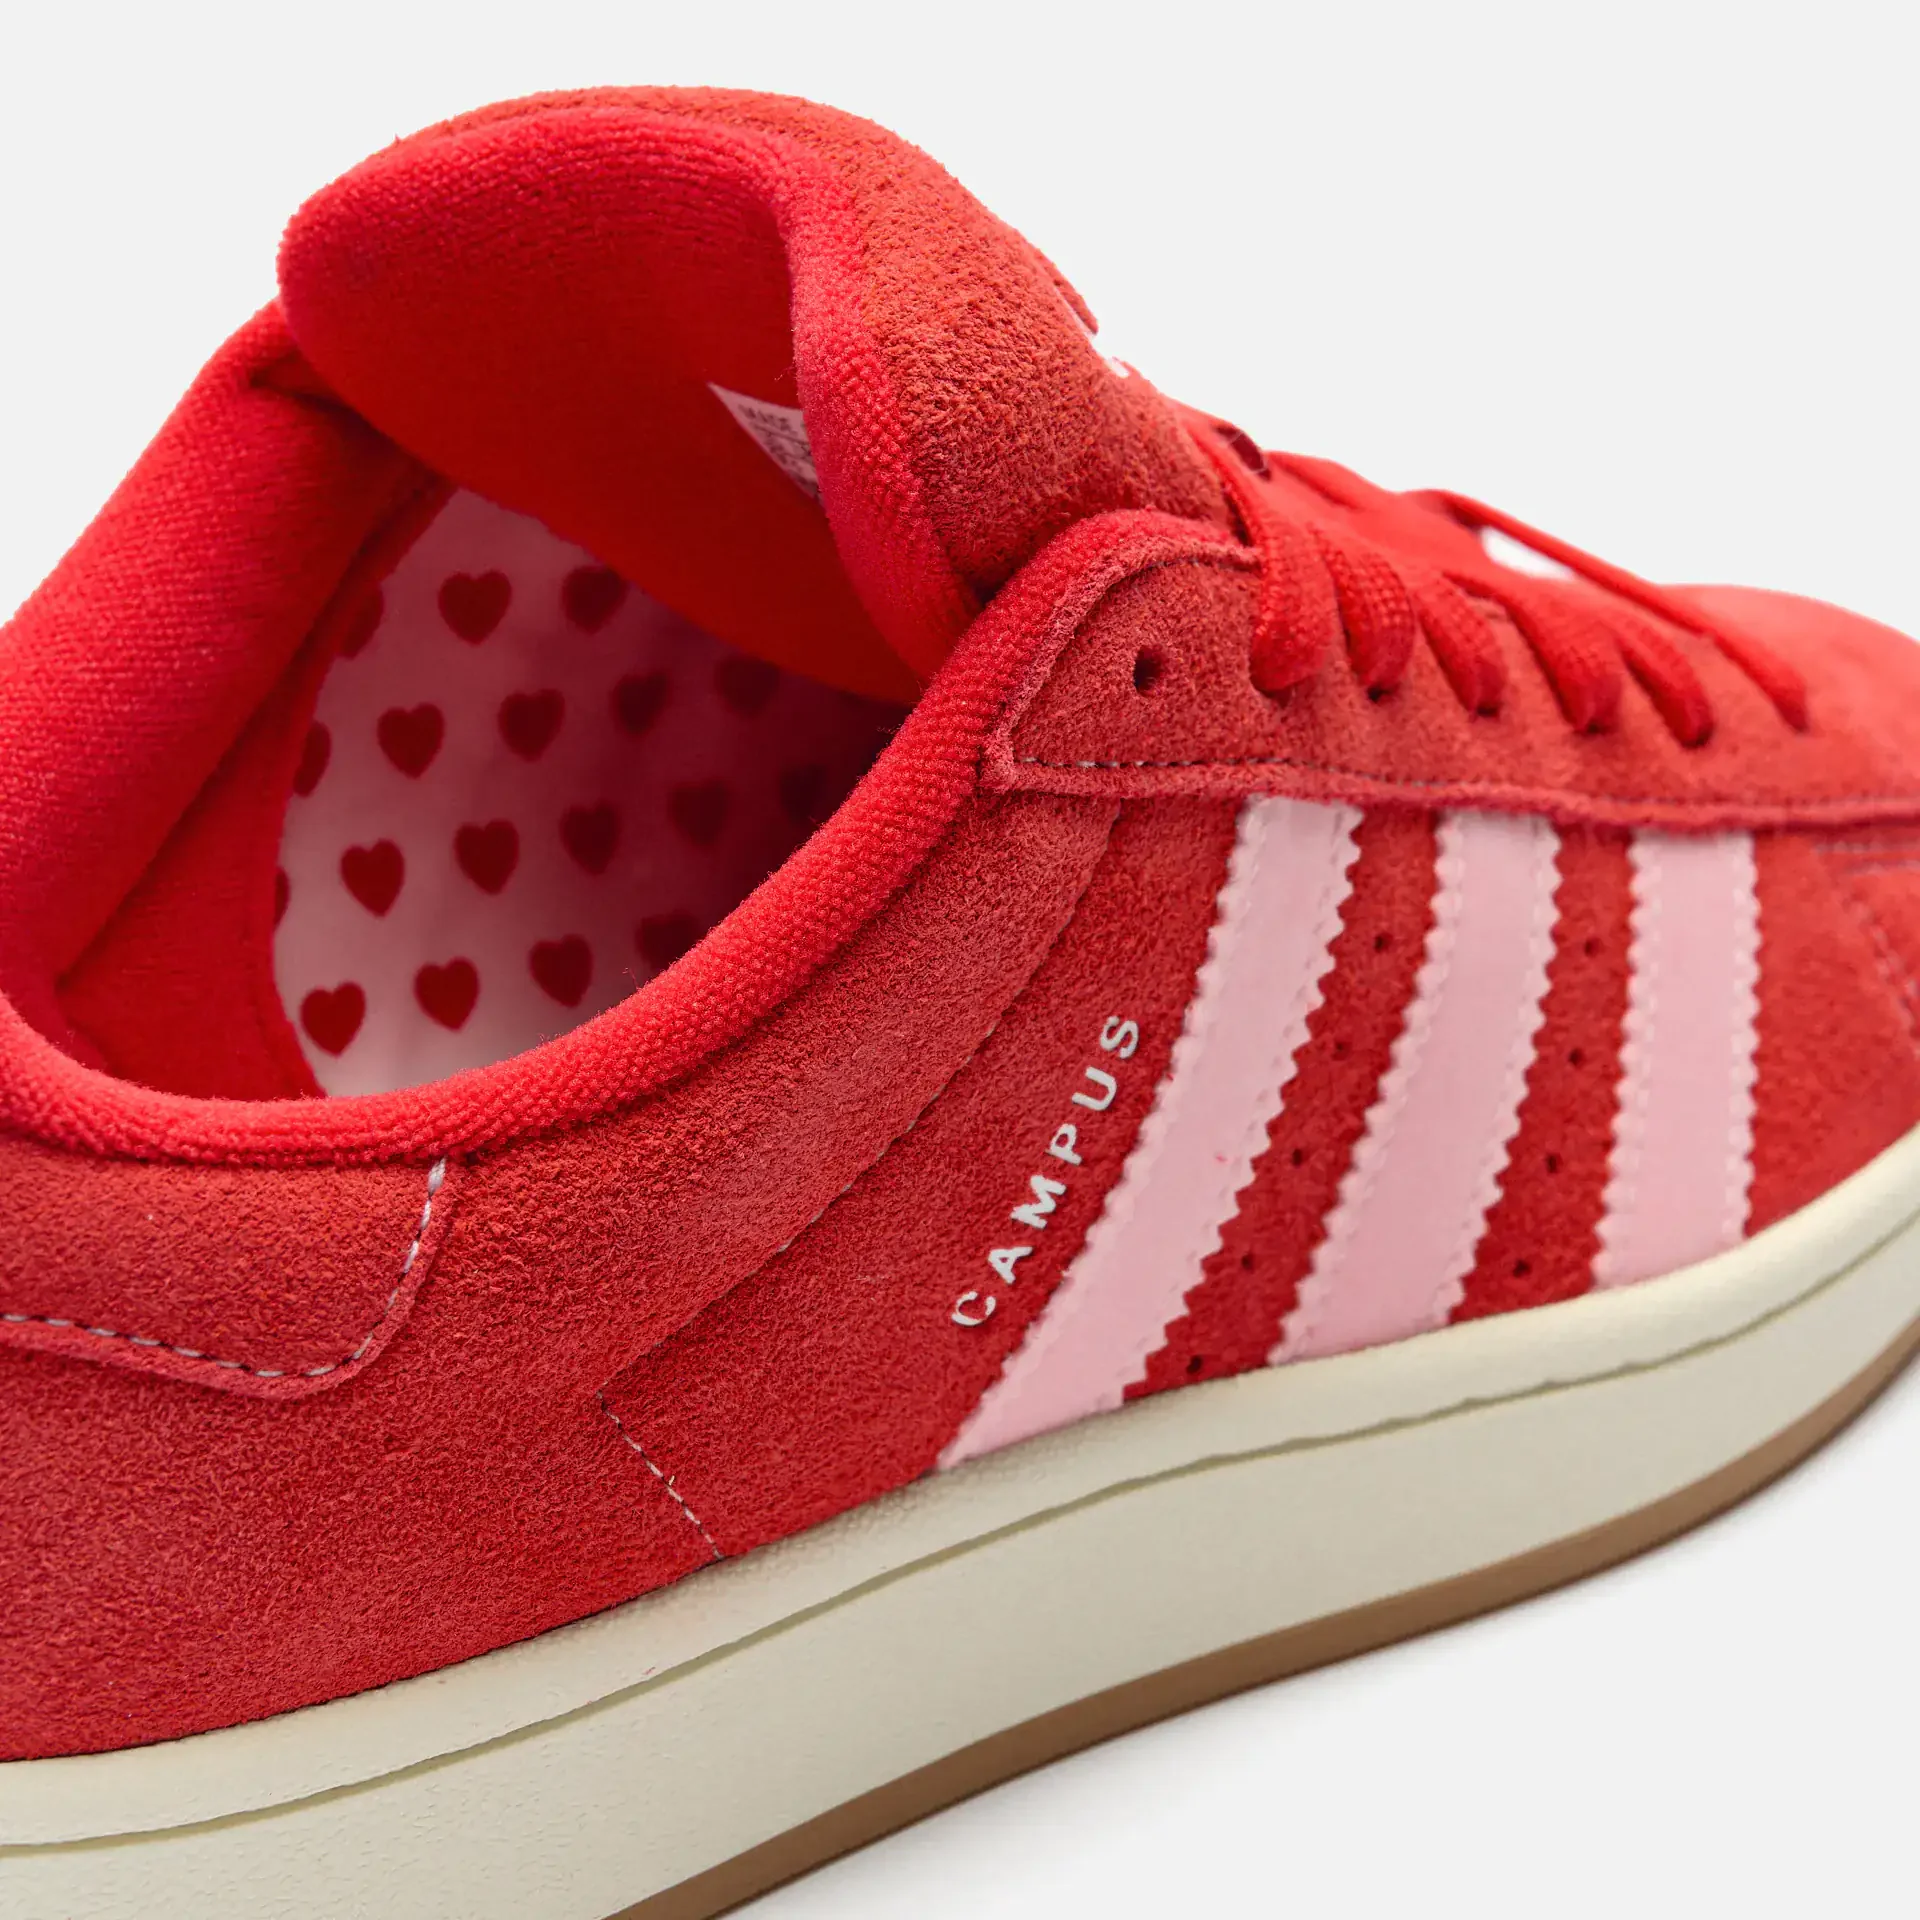 adidas Originals Sneaker Campus 00s Better Scarlet/Clear Pink/Cloud White